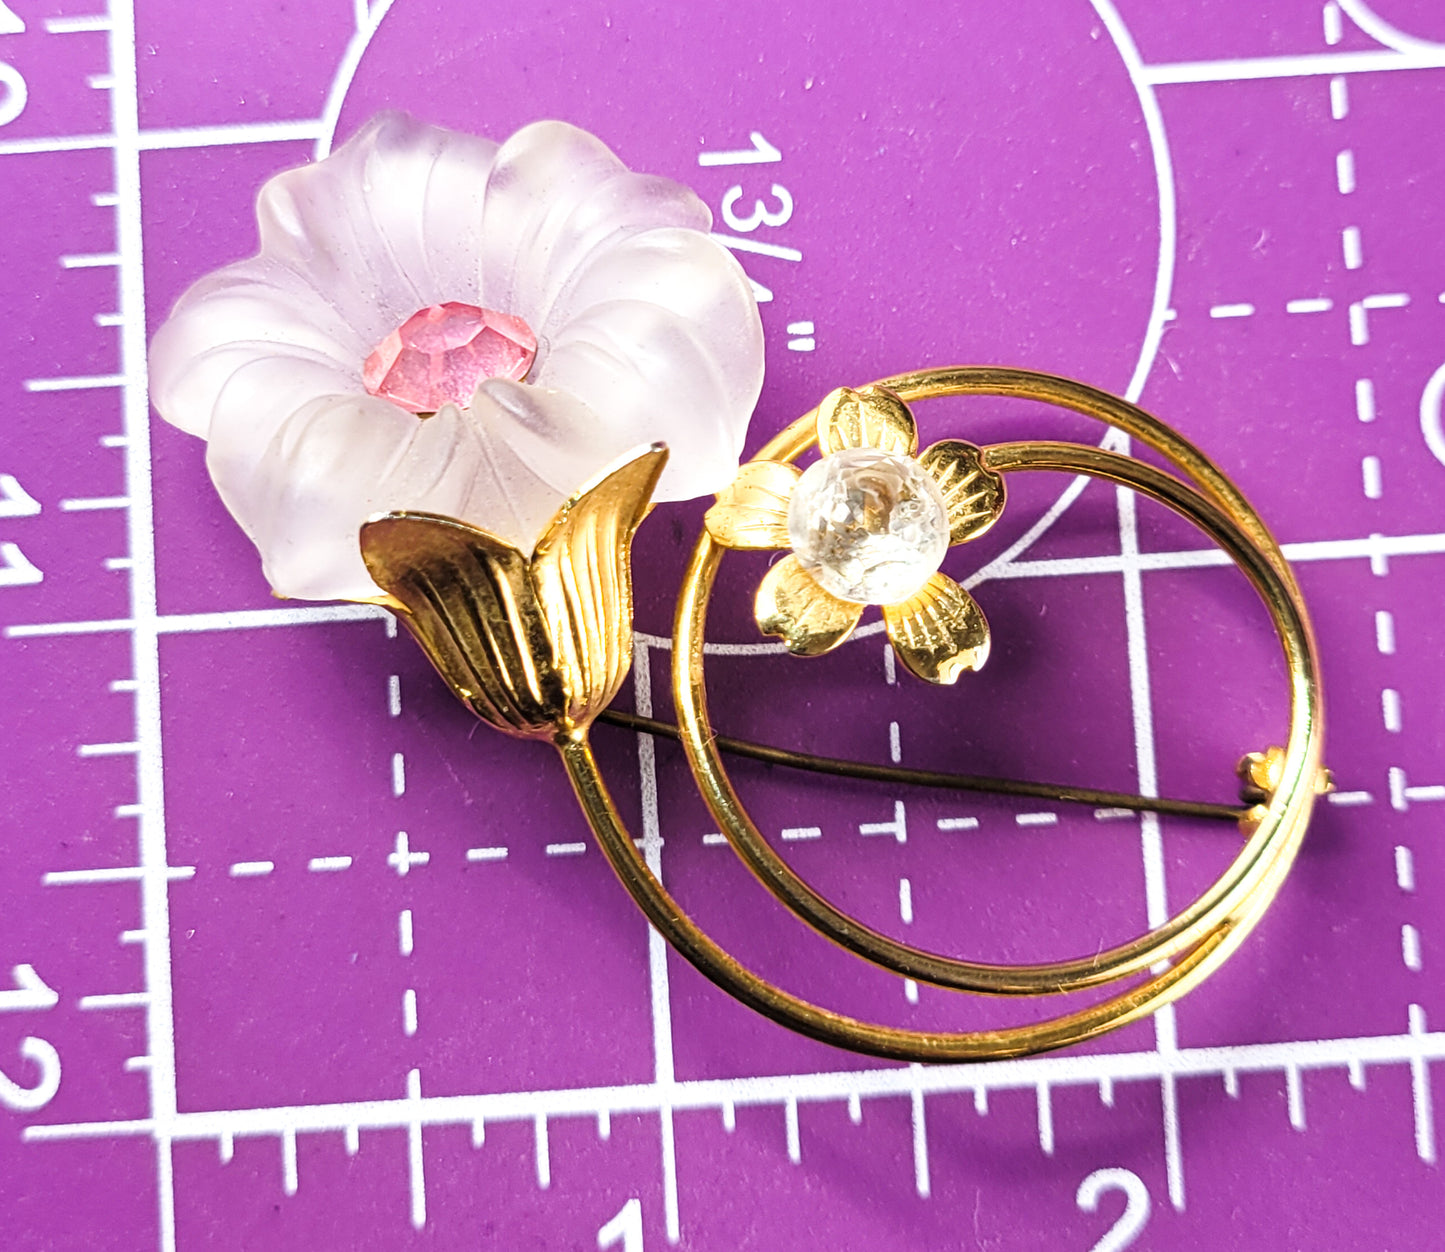 Frosted glass la lique style molded flower vintage brooch with pink rhinestone accents